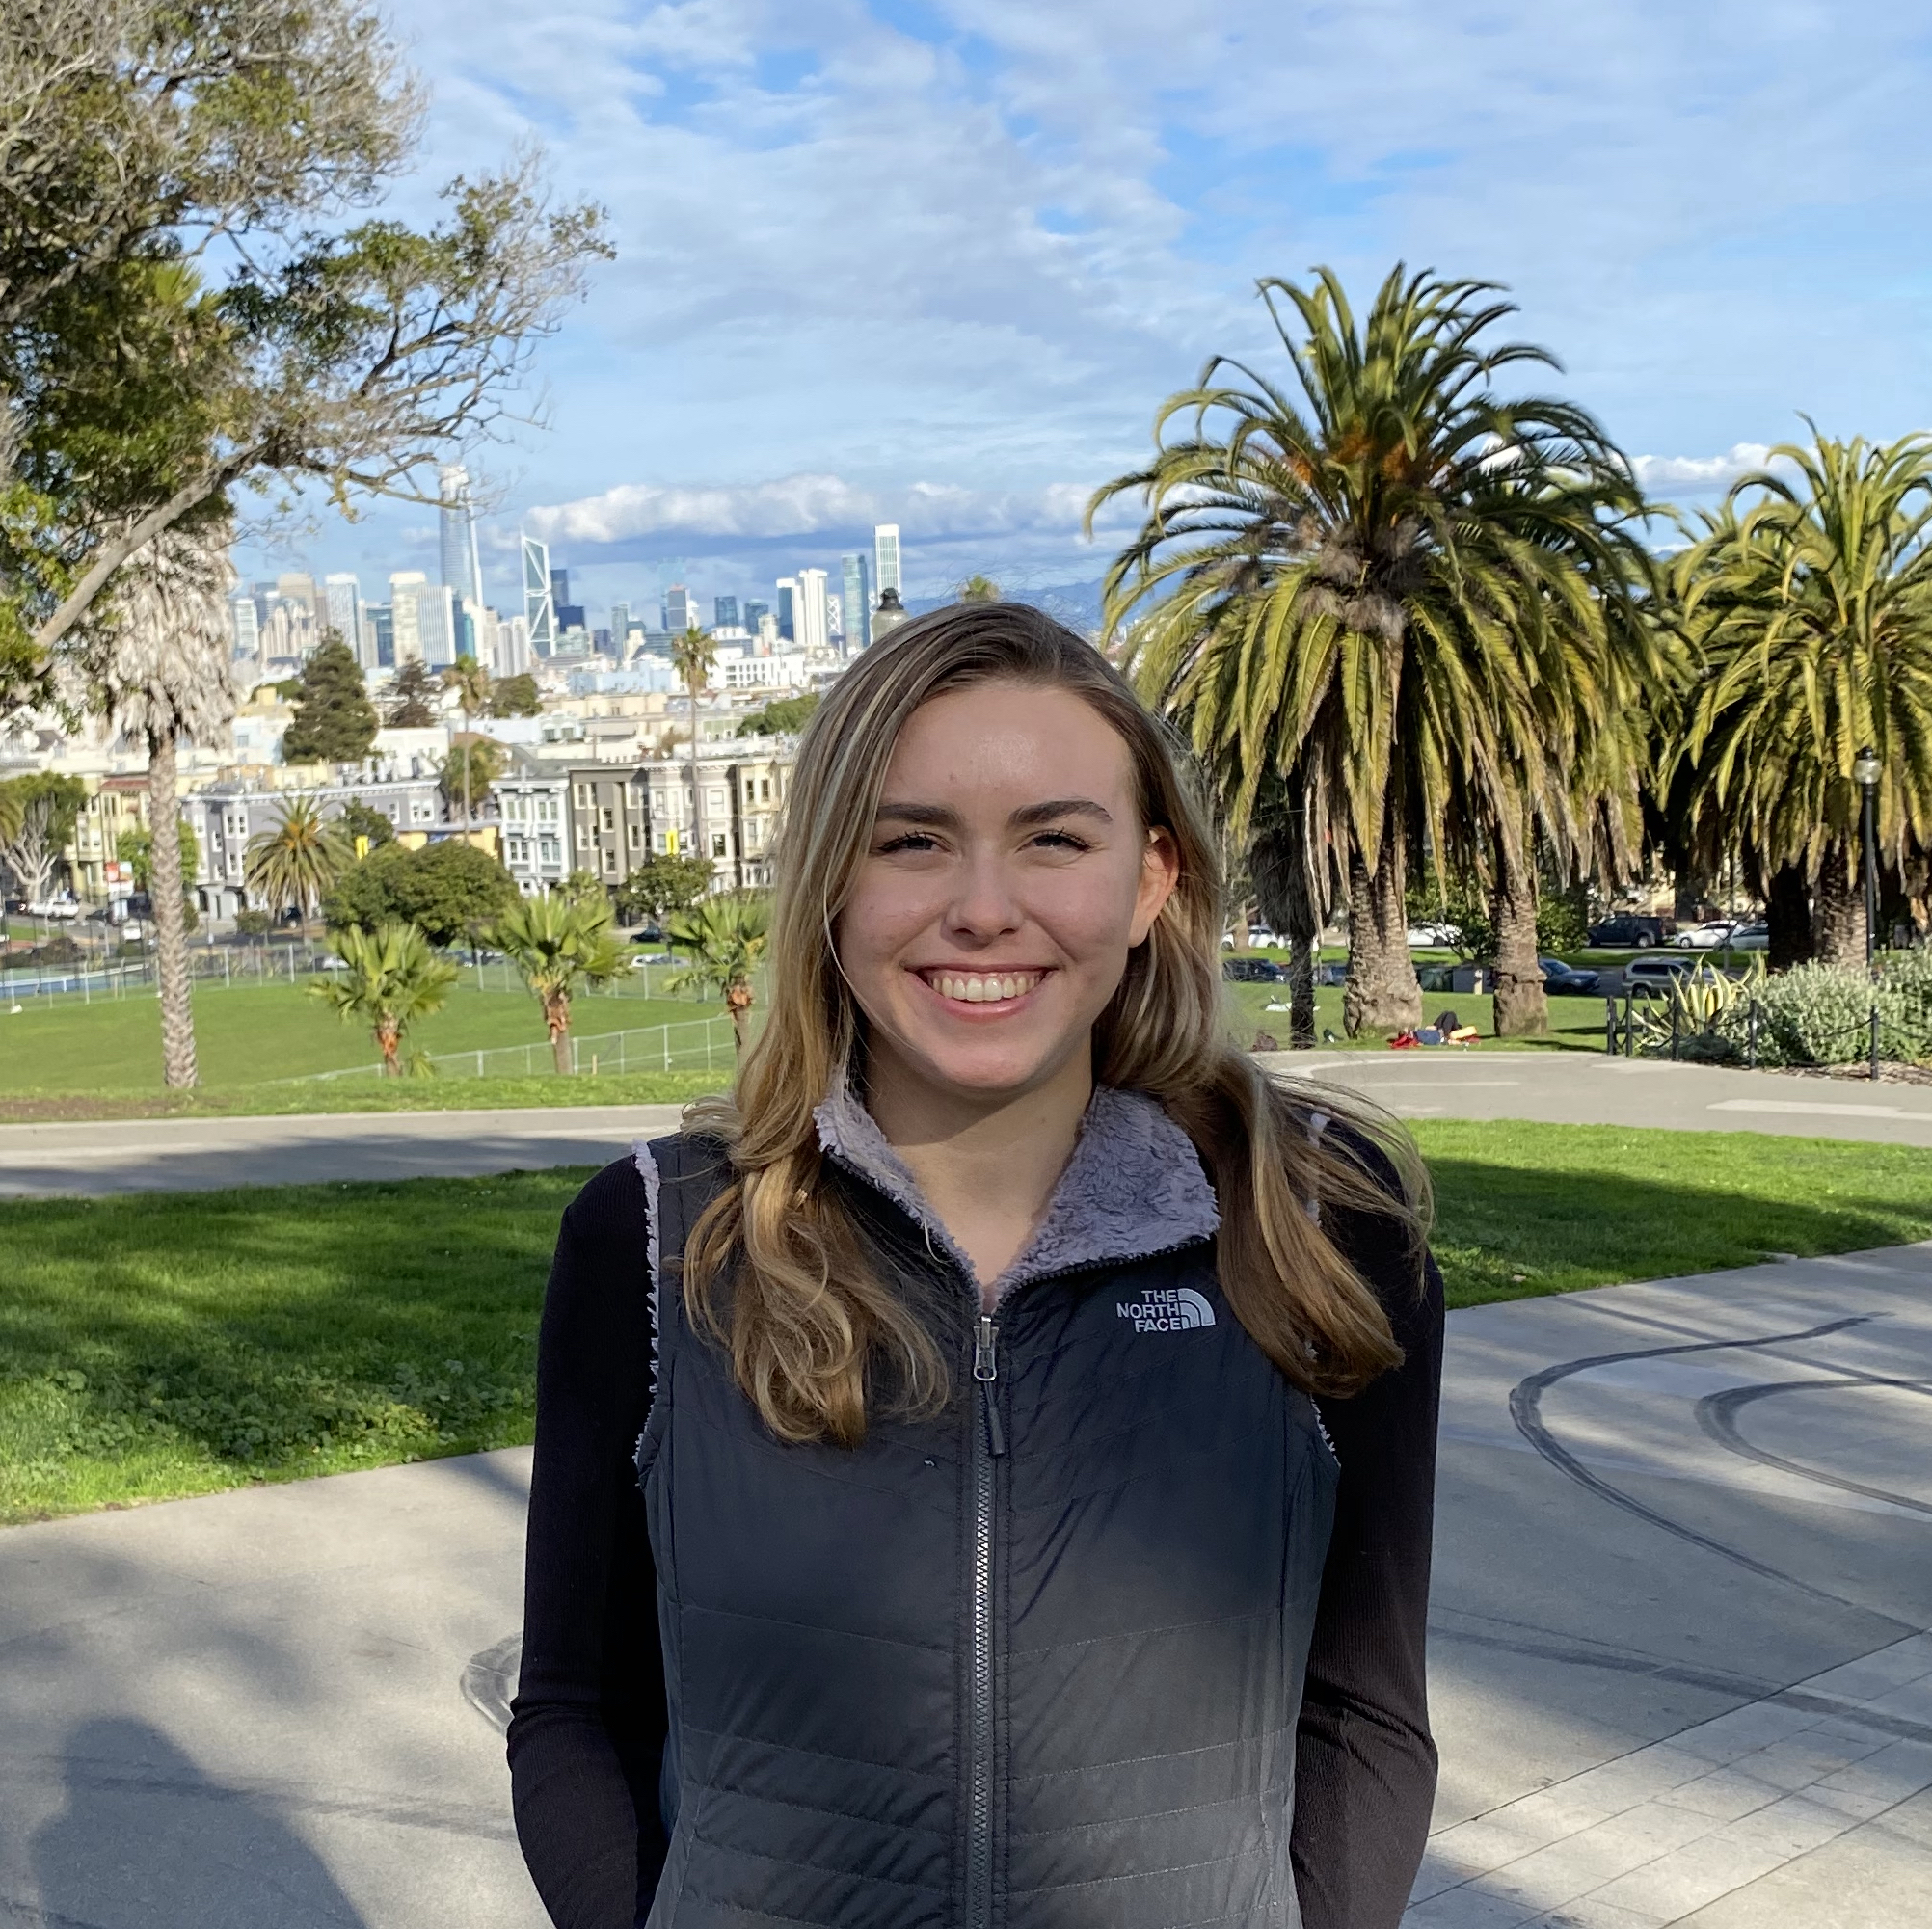 Claire is standing in front of a park with palm trees. In the background you can see the San Francisco skyline. She is wearing a black shirt and a vest.